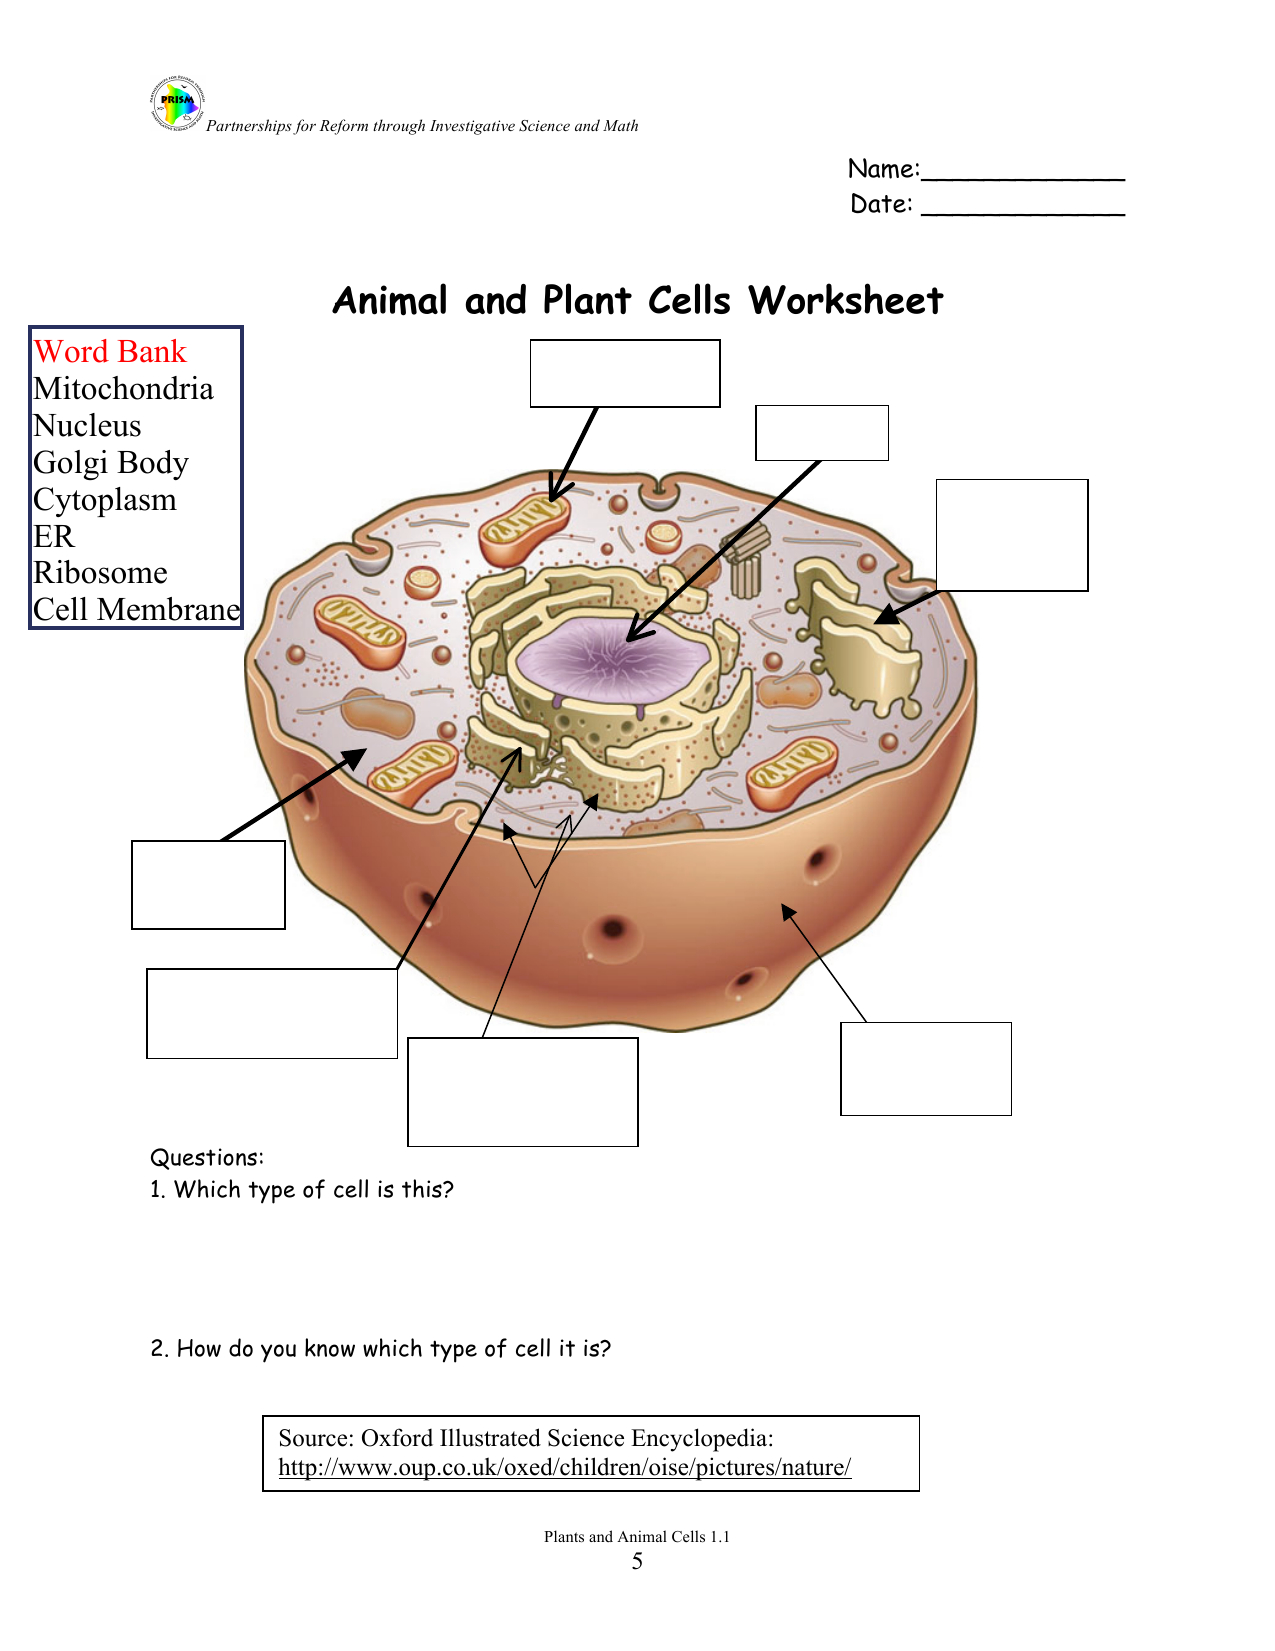 cells-alive-cell-cycle-worksheet-key-goorganic